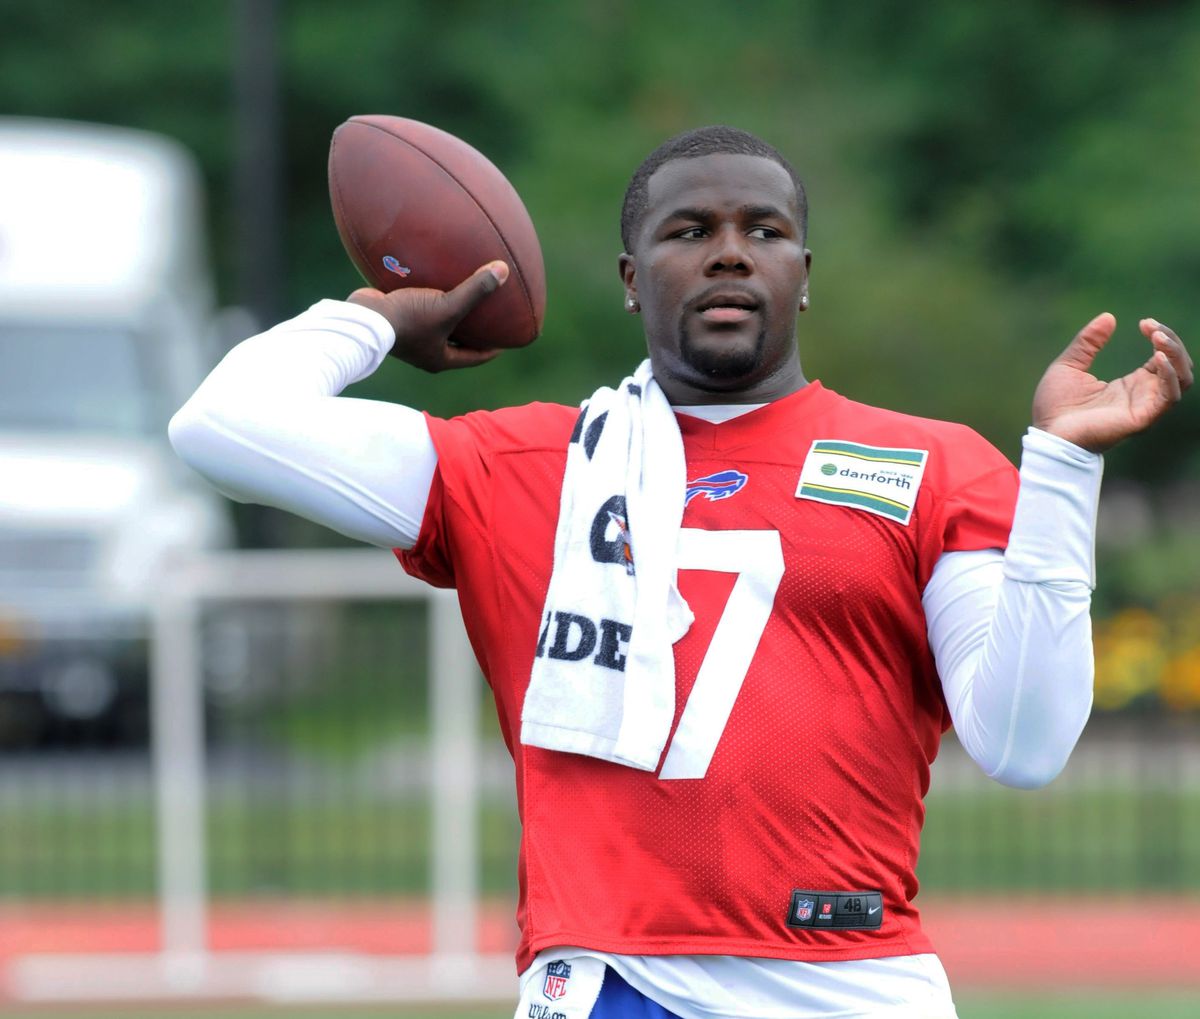 Cardale Jones throws a warm up pass in training camp.